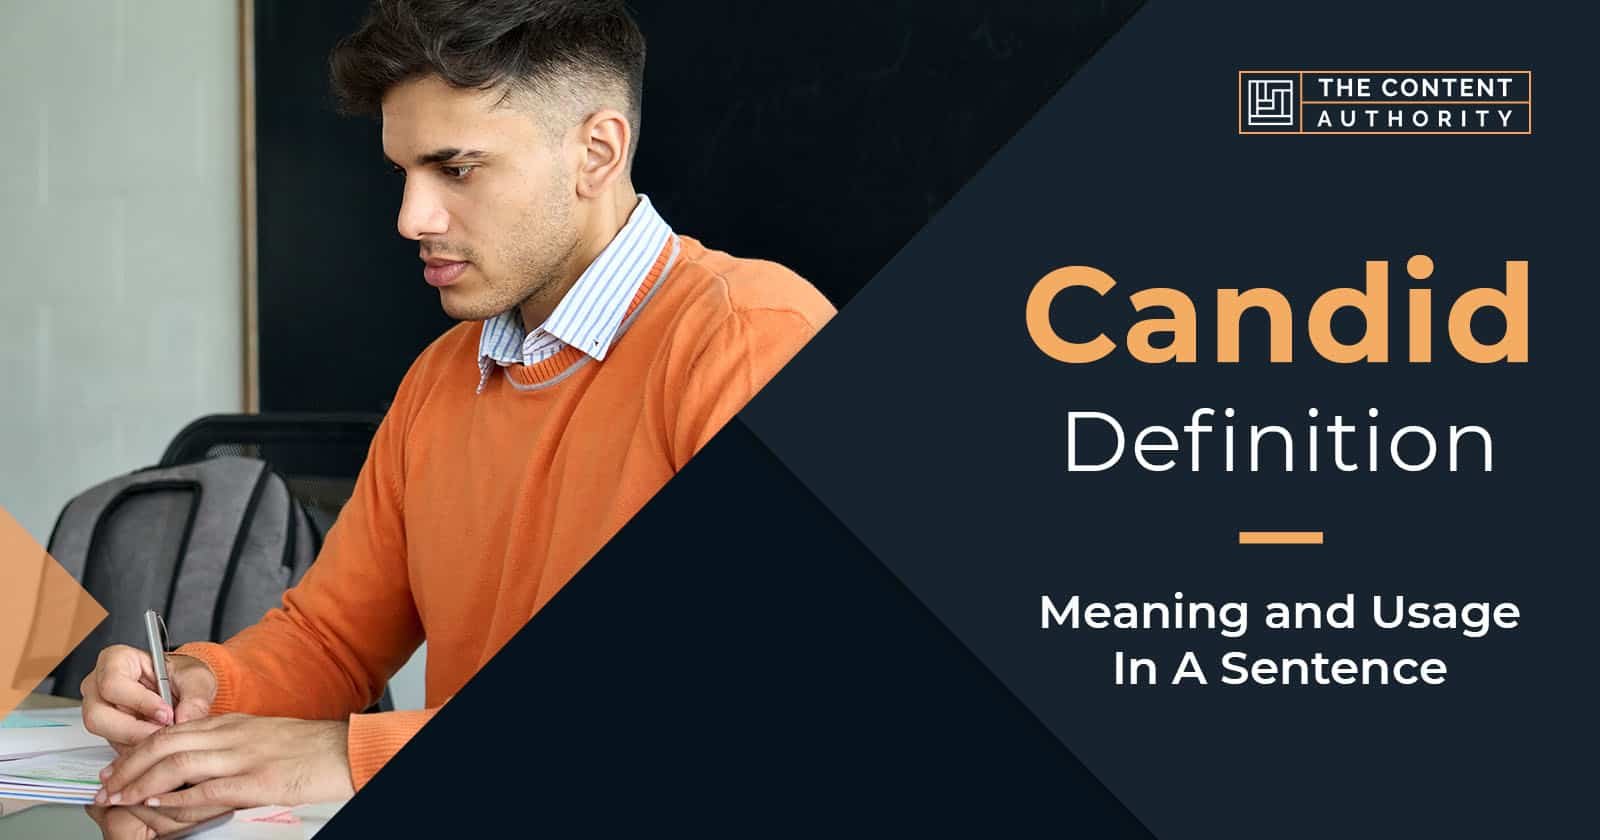 Candid Definition – Meaning and Usage in a Sentence